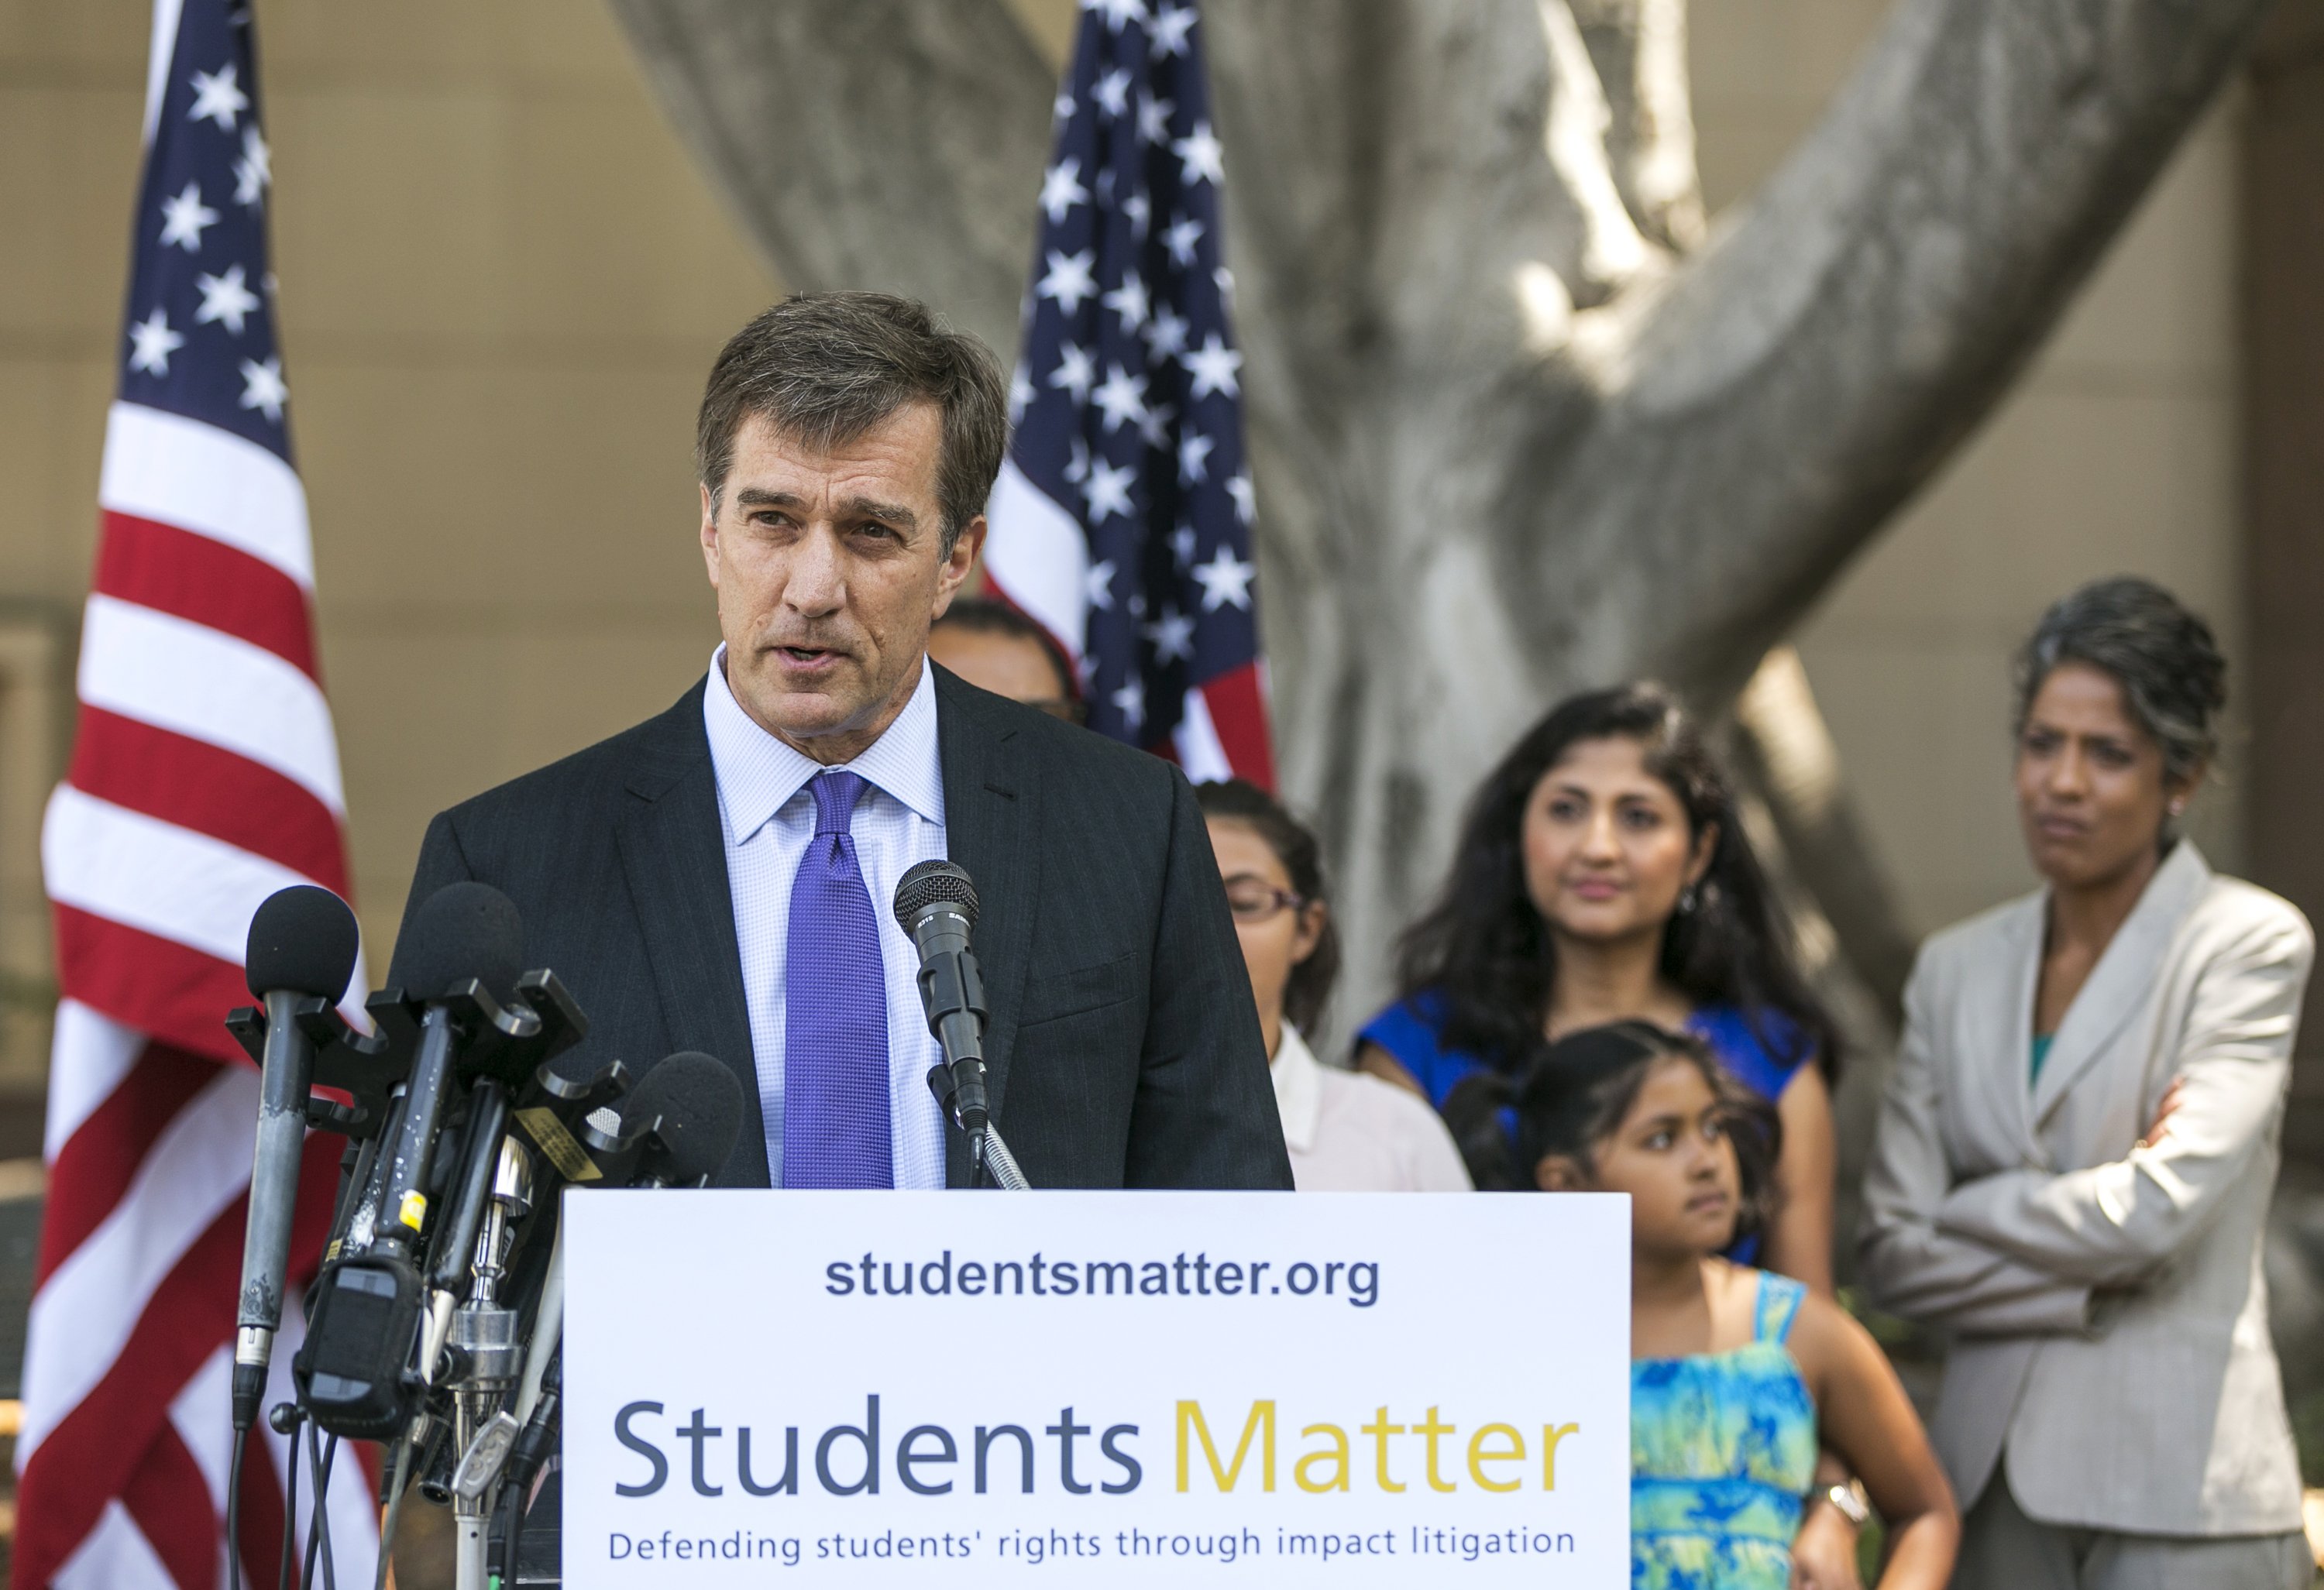 Silicon Valley entrepreneur and founder of Students Matter David Welch makes comments on the Vergara v. California lawsuit verdict in Los Angeles, Tuesday, June 10, 2014. (Damian Dovarganes—AP)